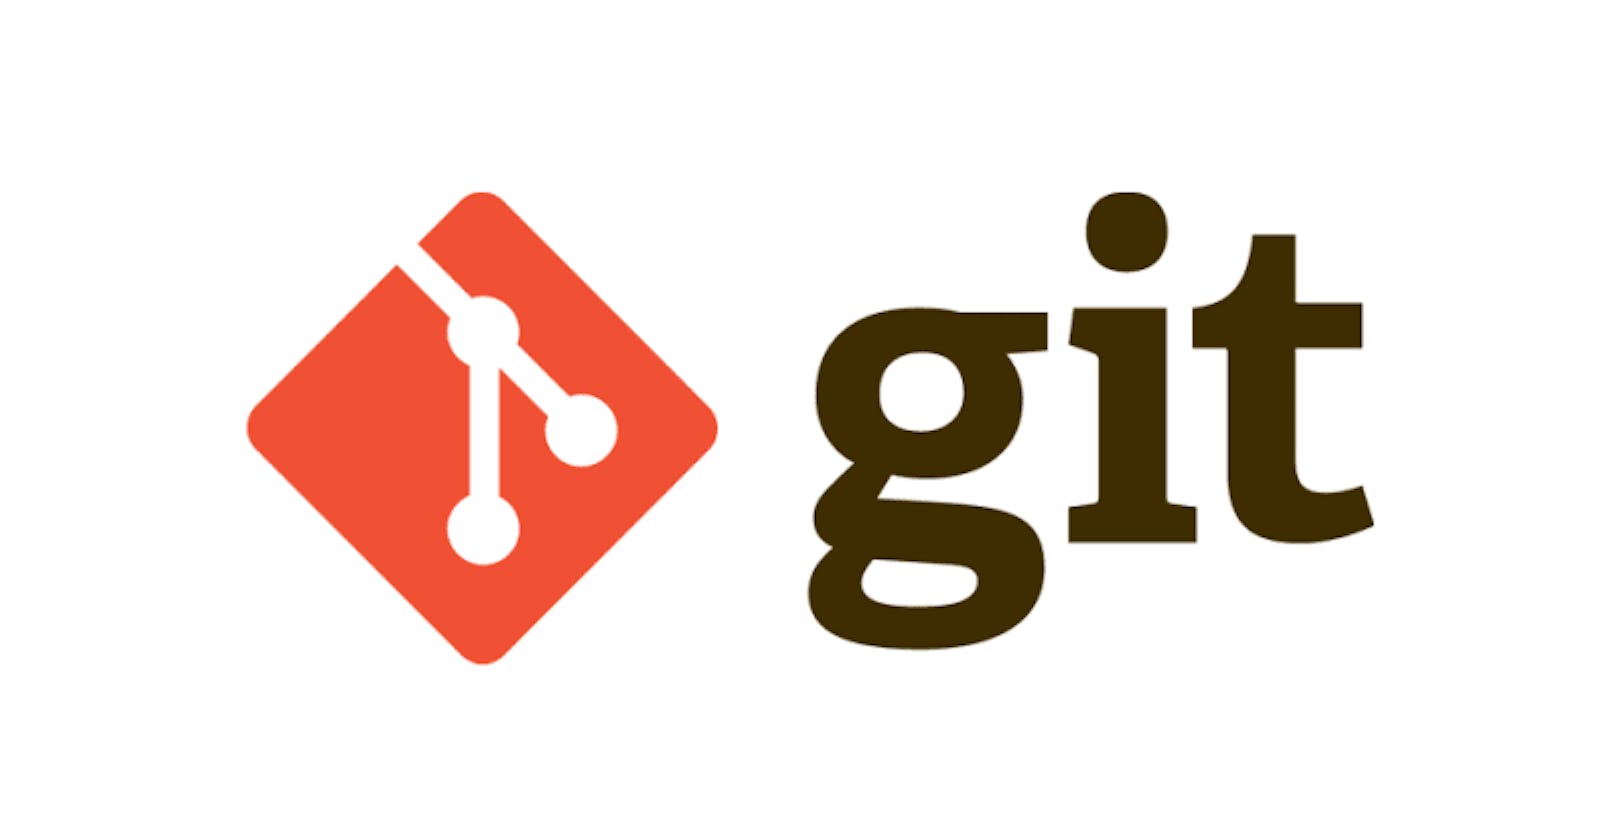 Check file's git history even if renamed/moved